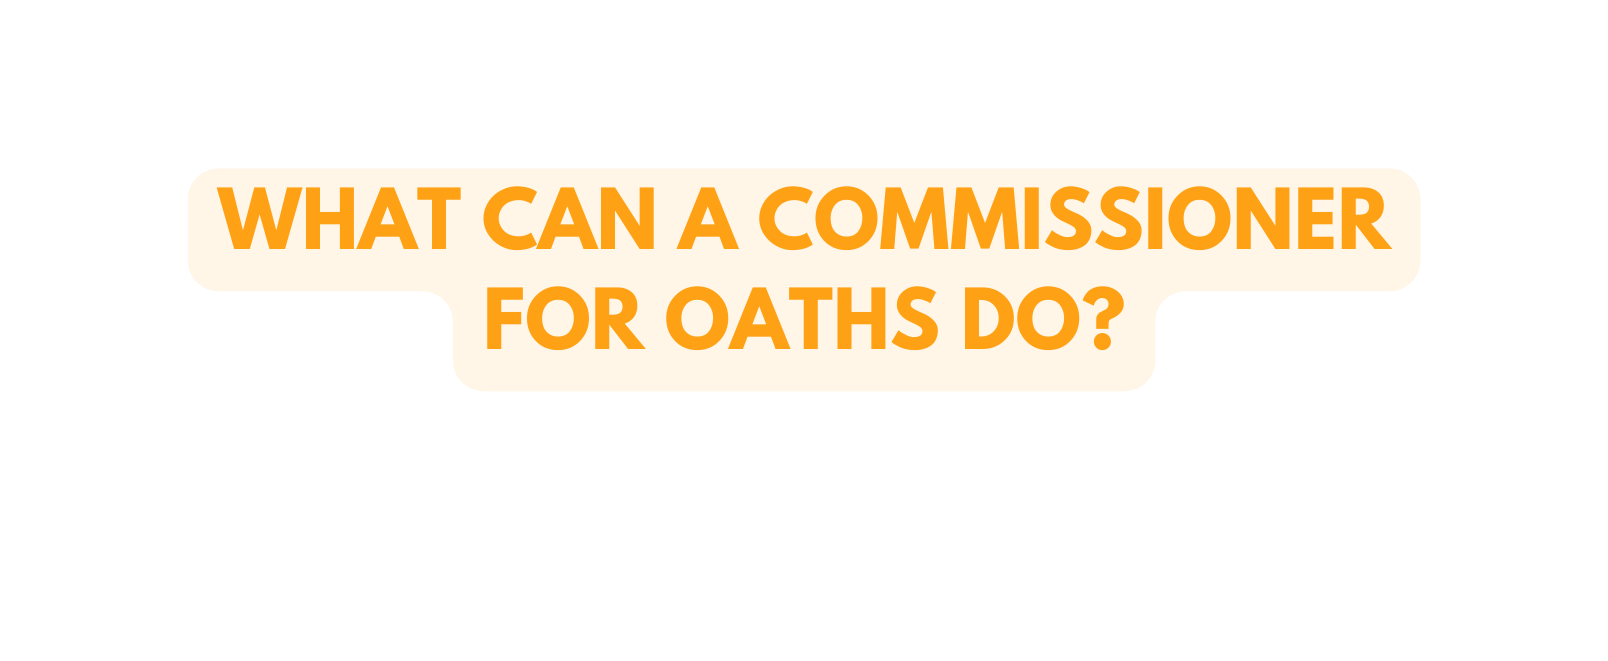 What Can a Commissioner for Oaths Do